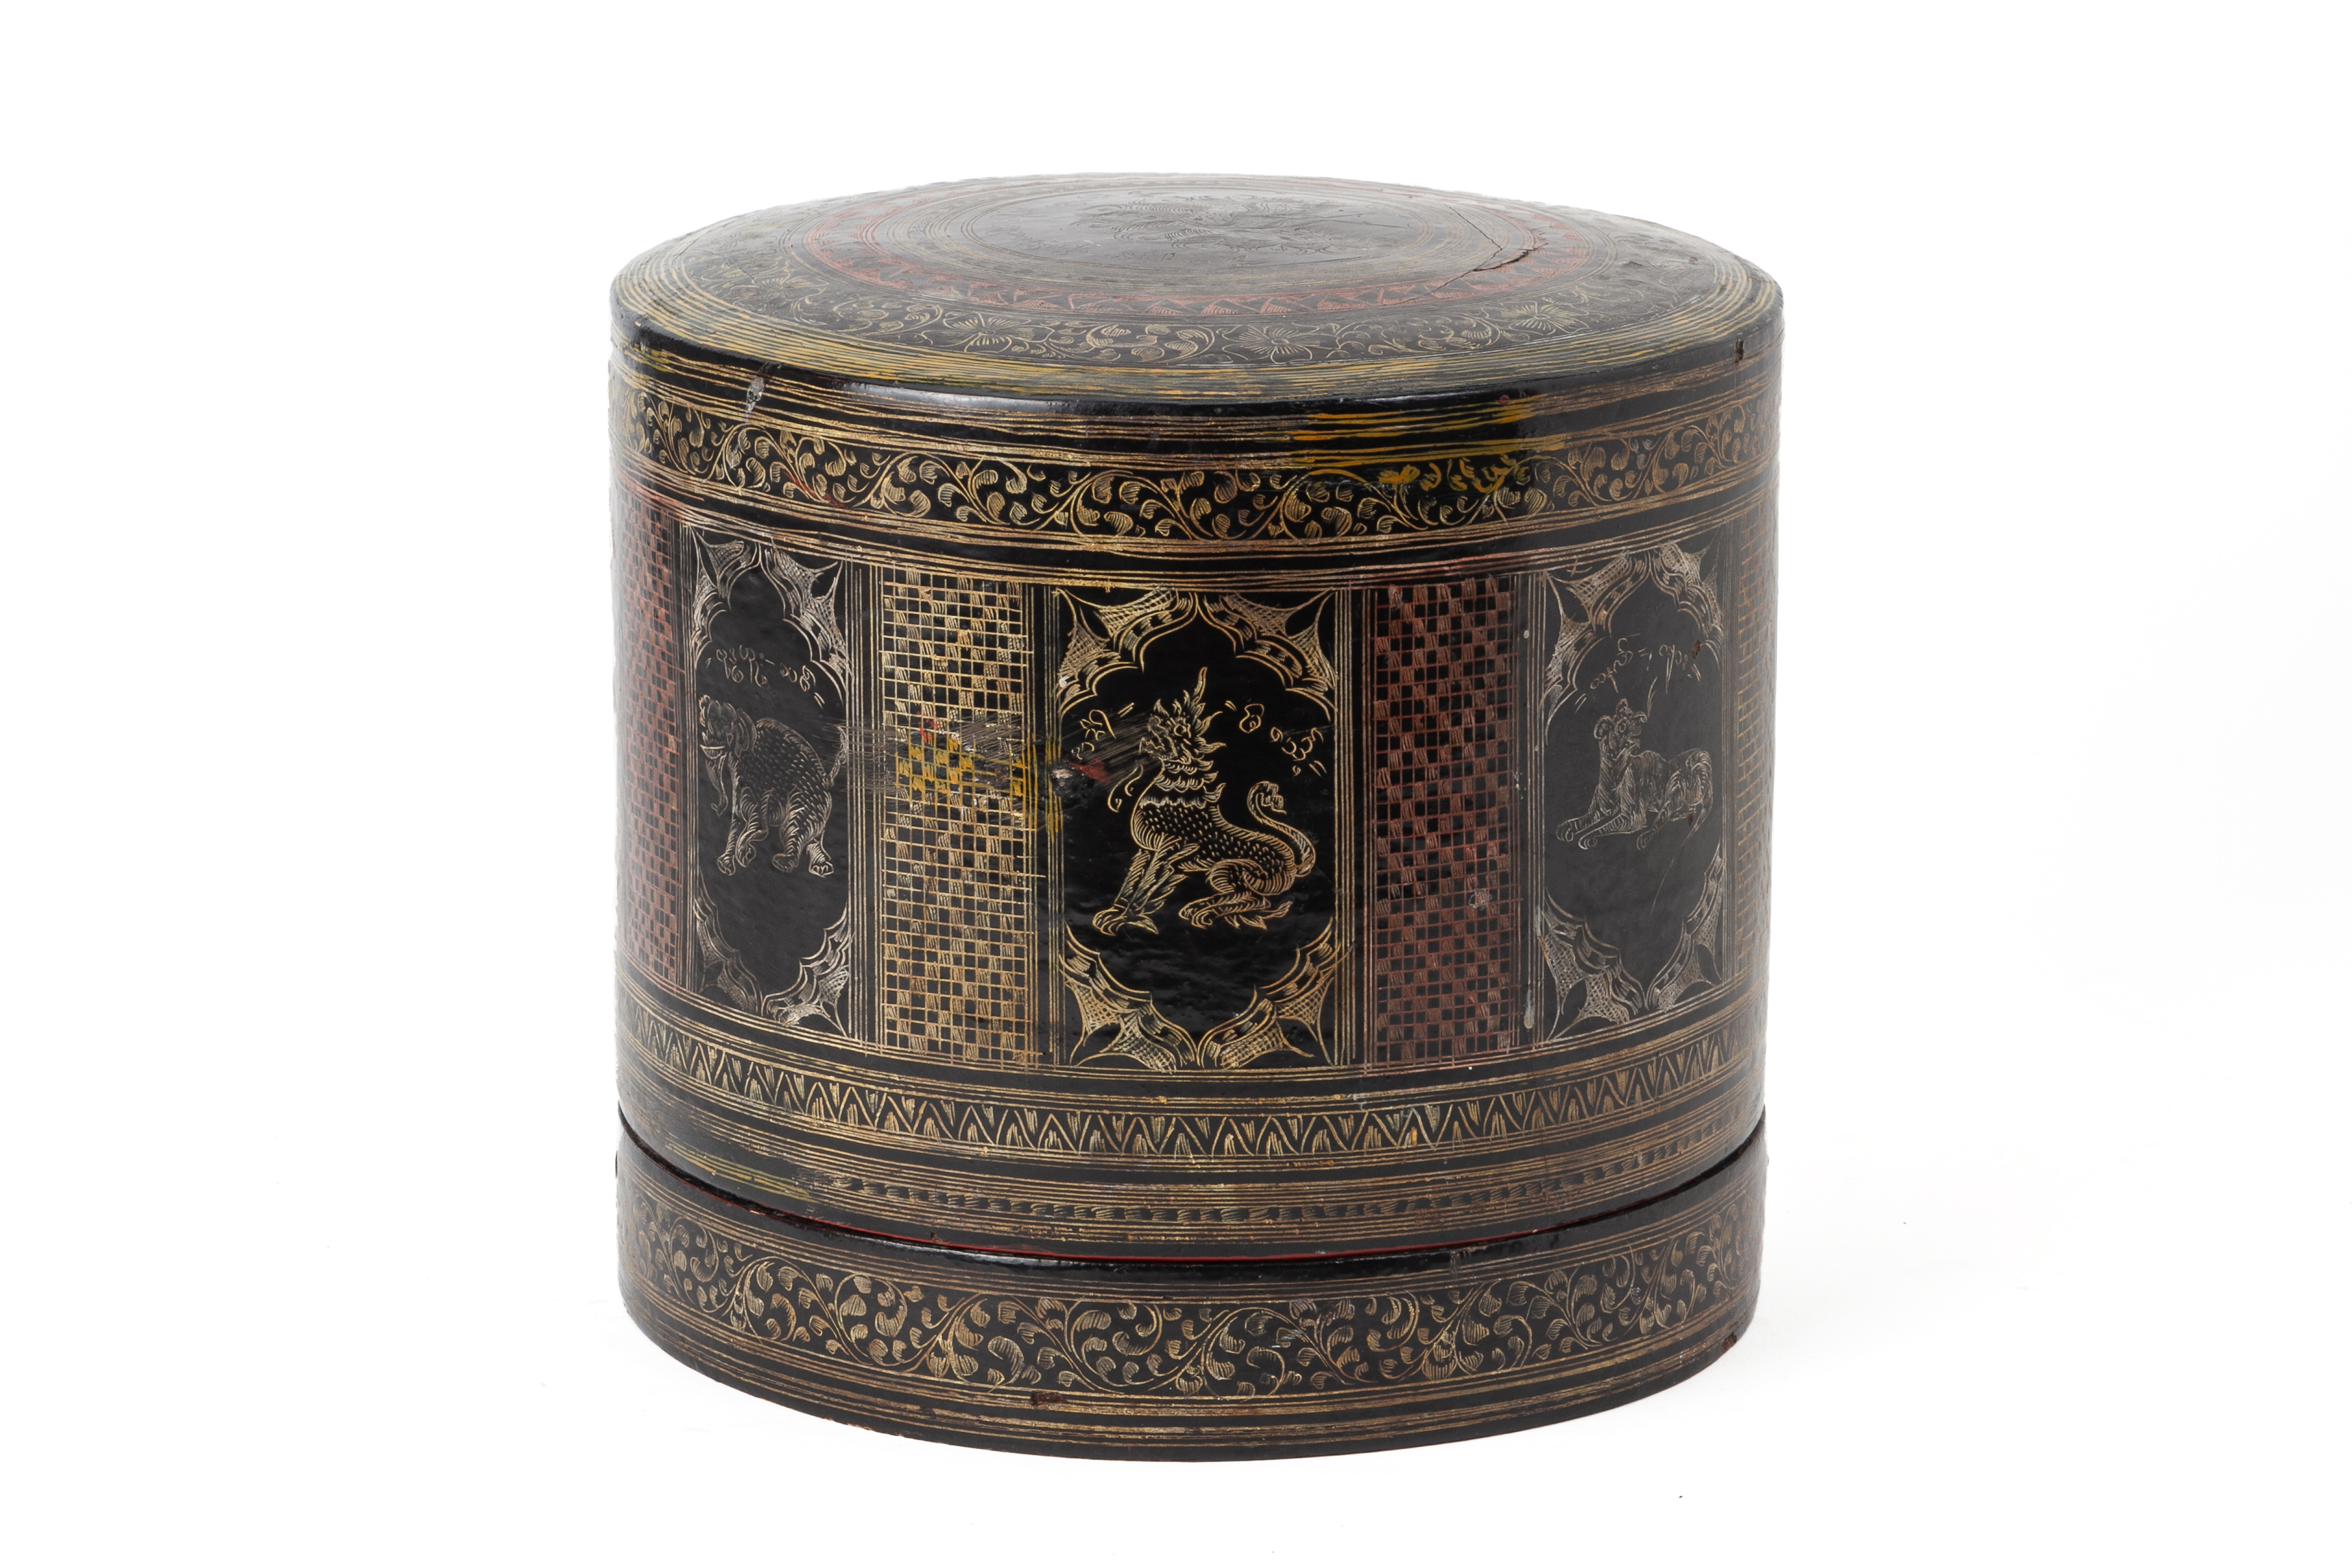 A LARGE BURMESE BLACK LACQUER CYLINDRICAL BETEL BOX